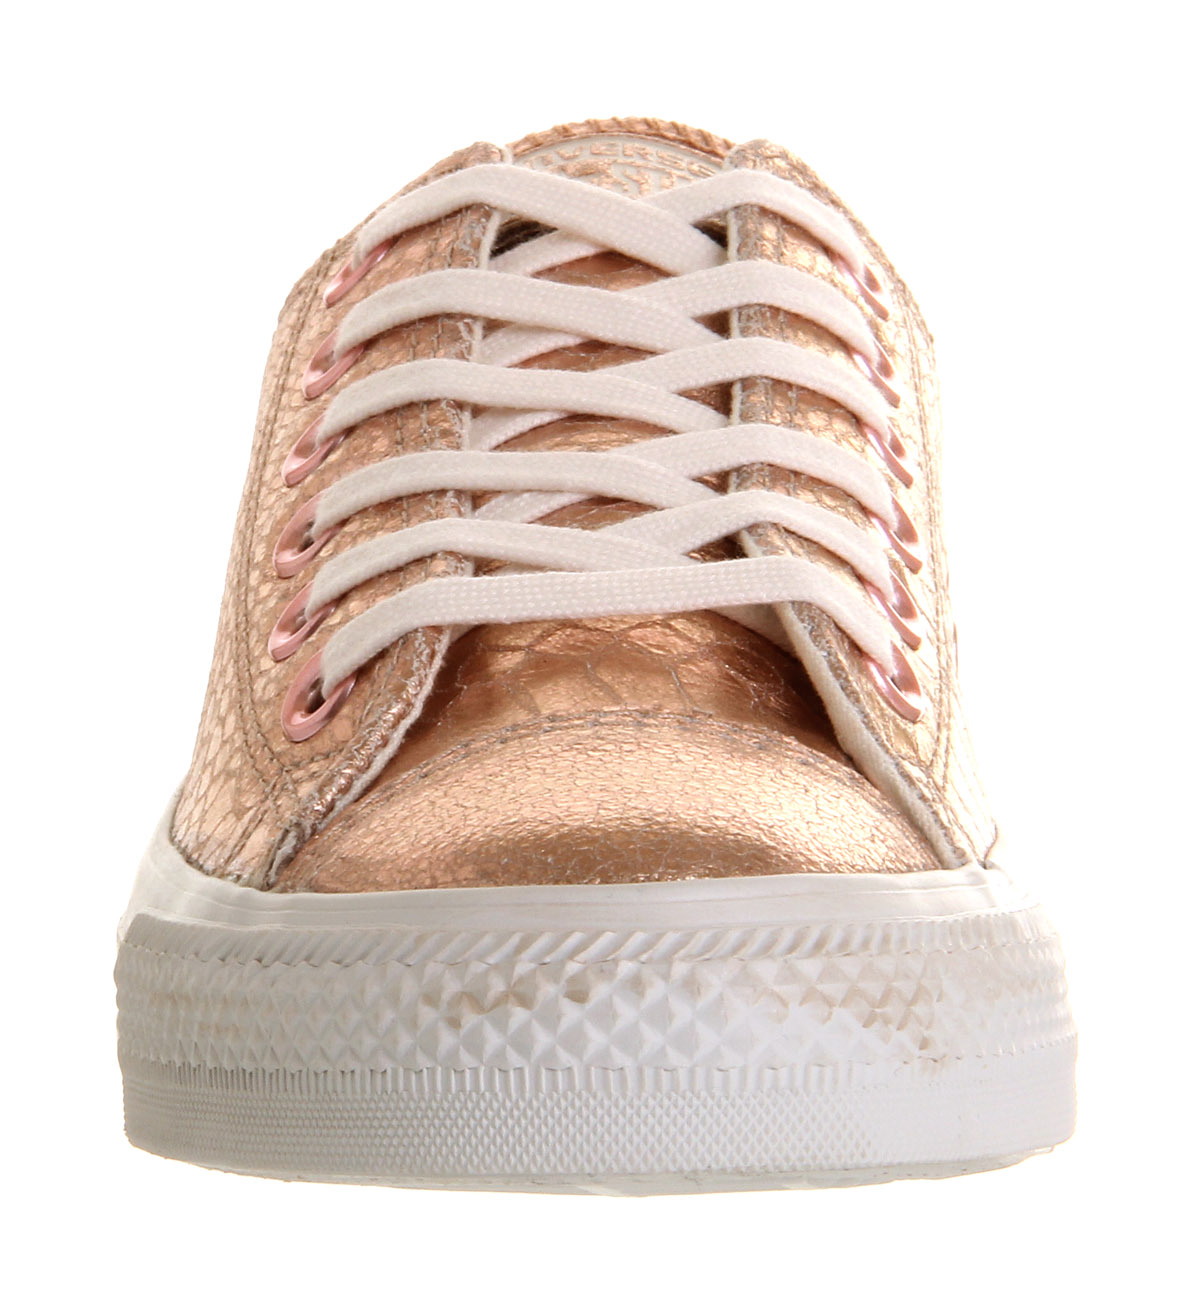 converse all star low rose metallic snake leather